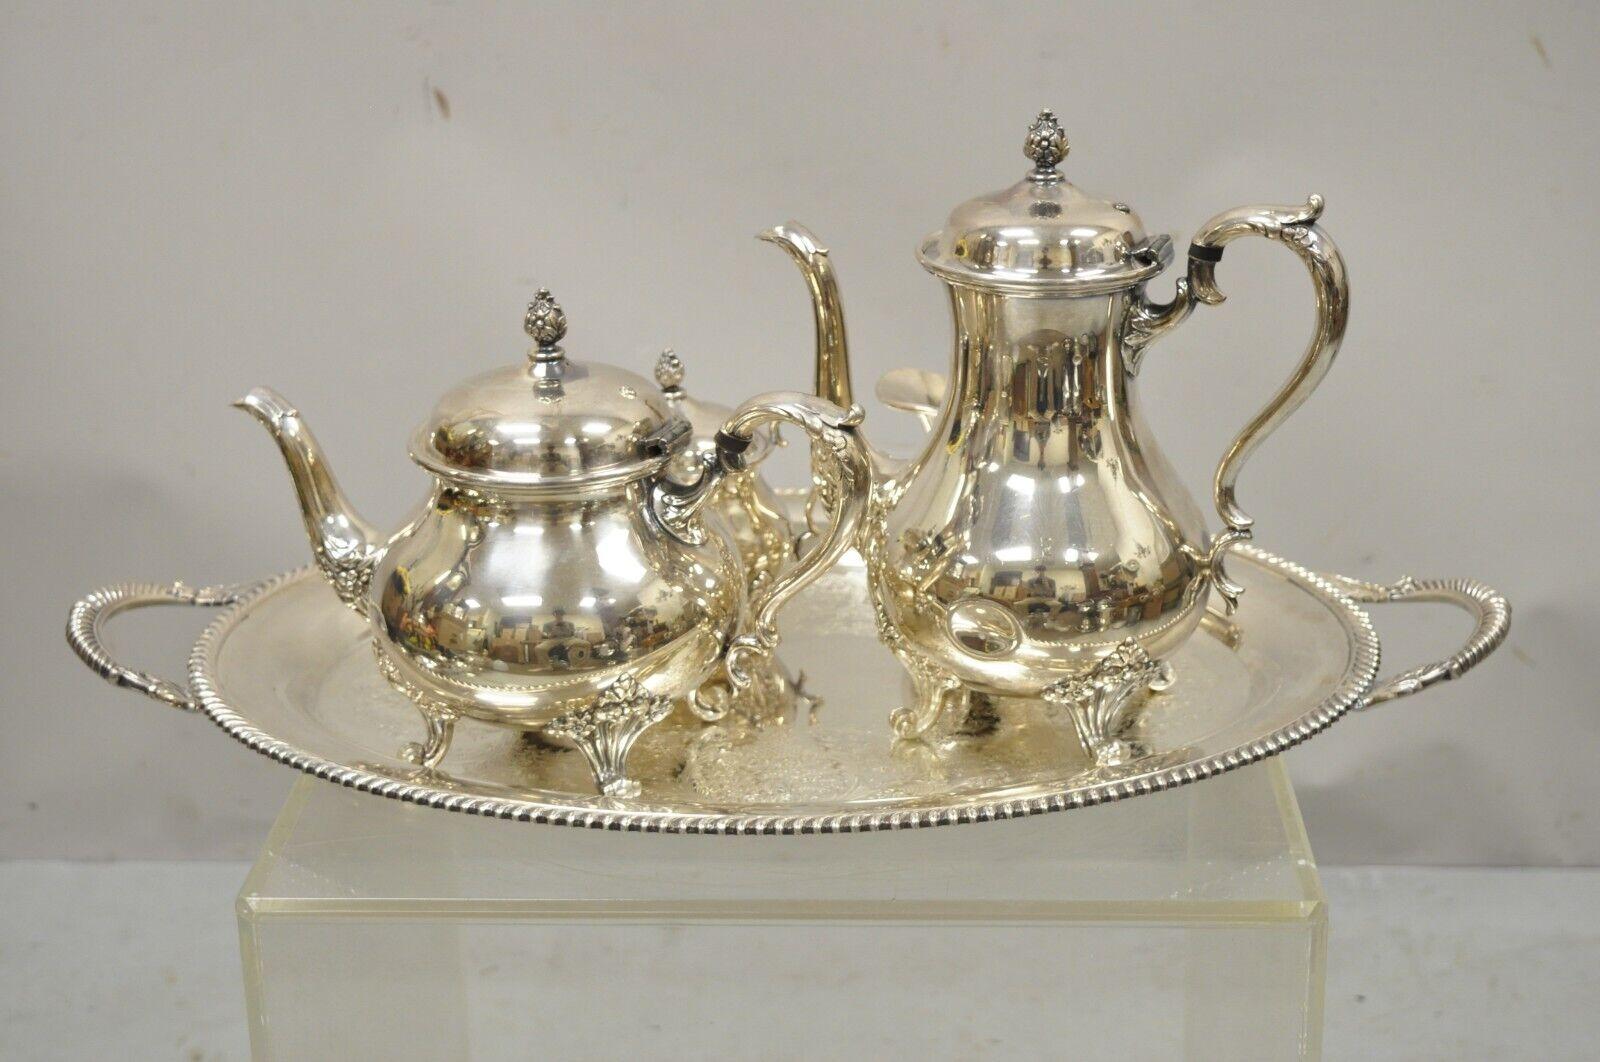 Wilcox International Silver Co Silver plate tea set serving tray and more - 5 pc Set. Item features (1) serving tray, (1) coffee pot, (1) tea pot, (1) creamer, (1) lidded sugar bowl, debossed floral detail, etched platter with scalloped edge,